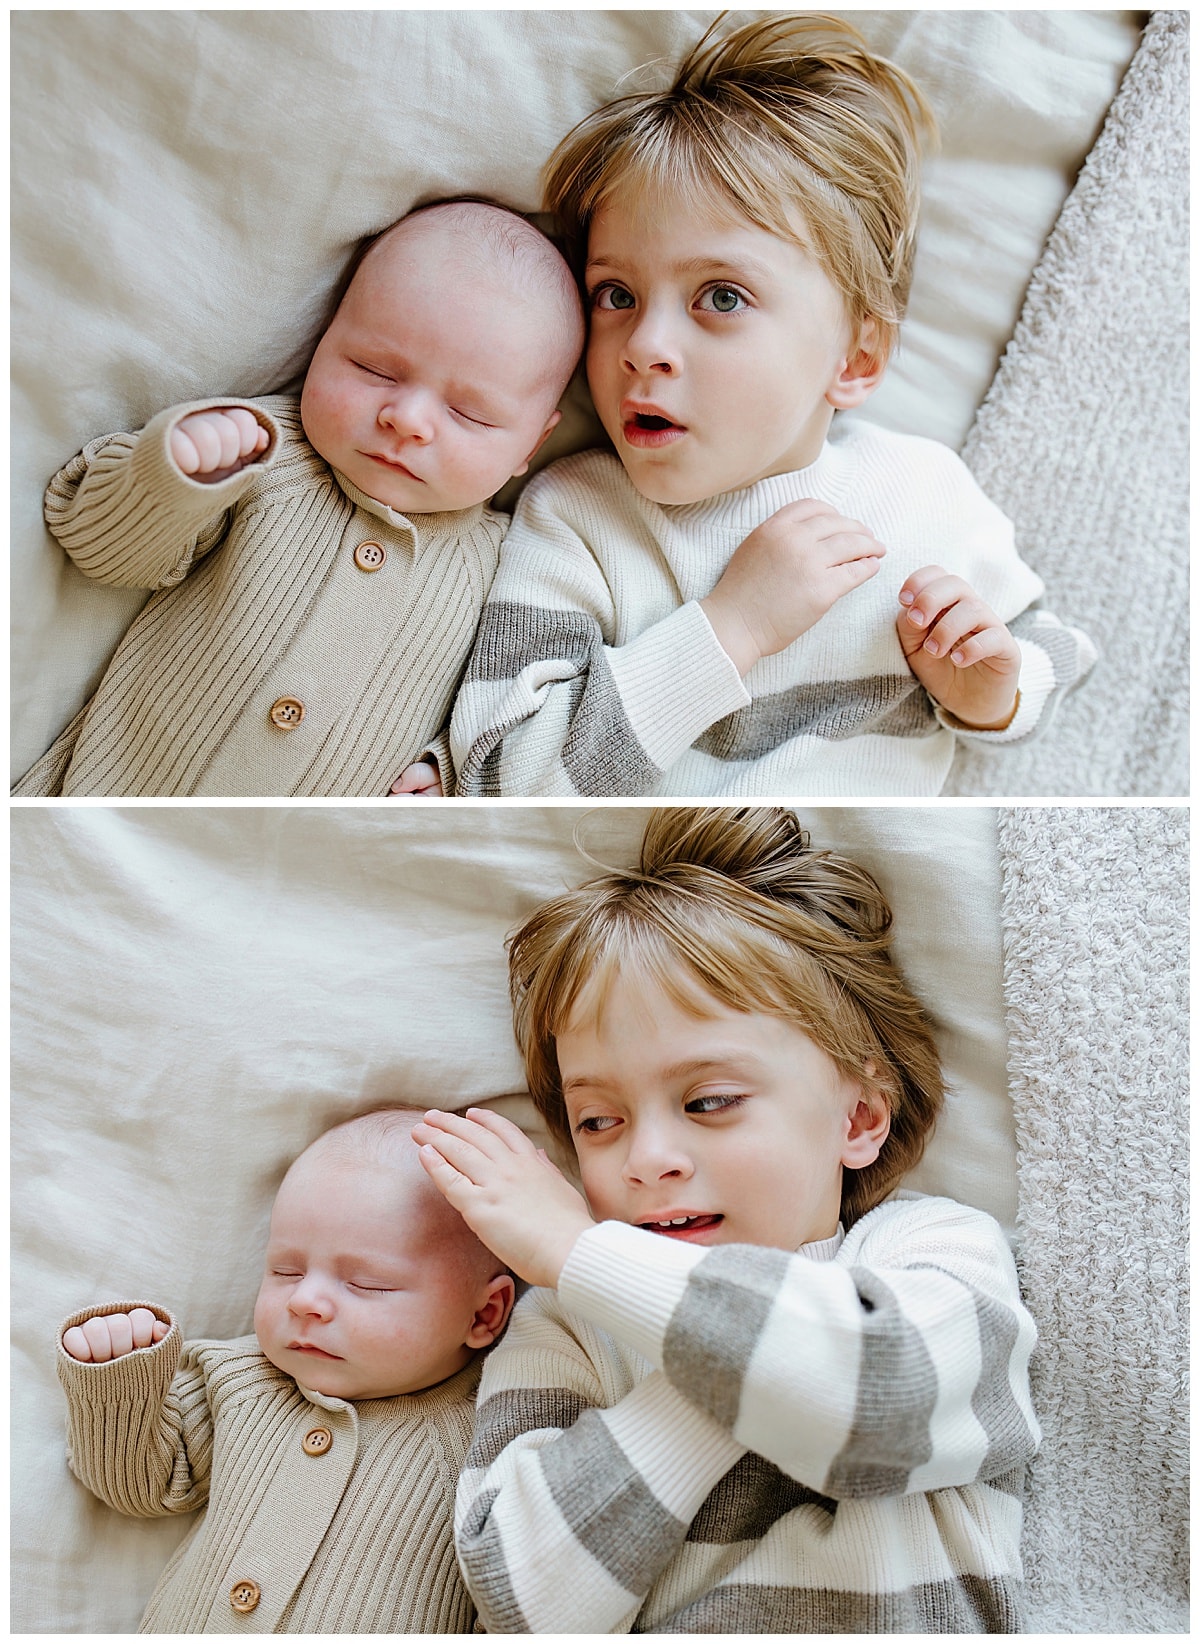 Babies cuddle and play together for Our Adventuring Souls Photography